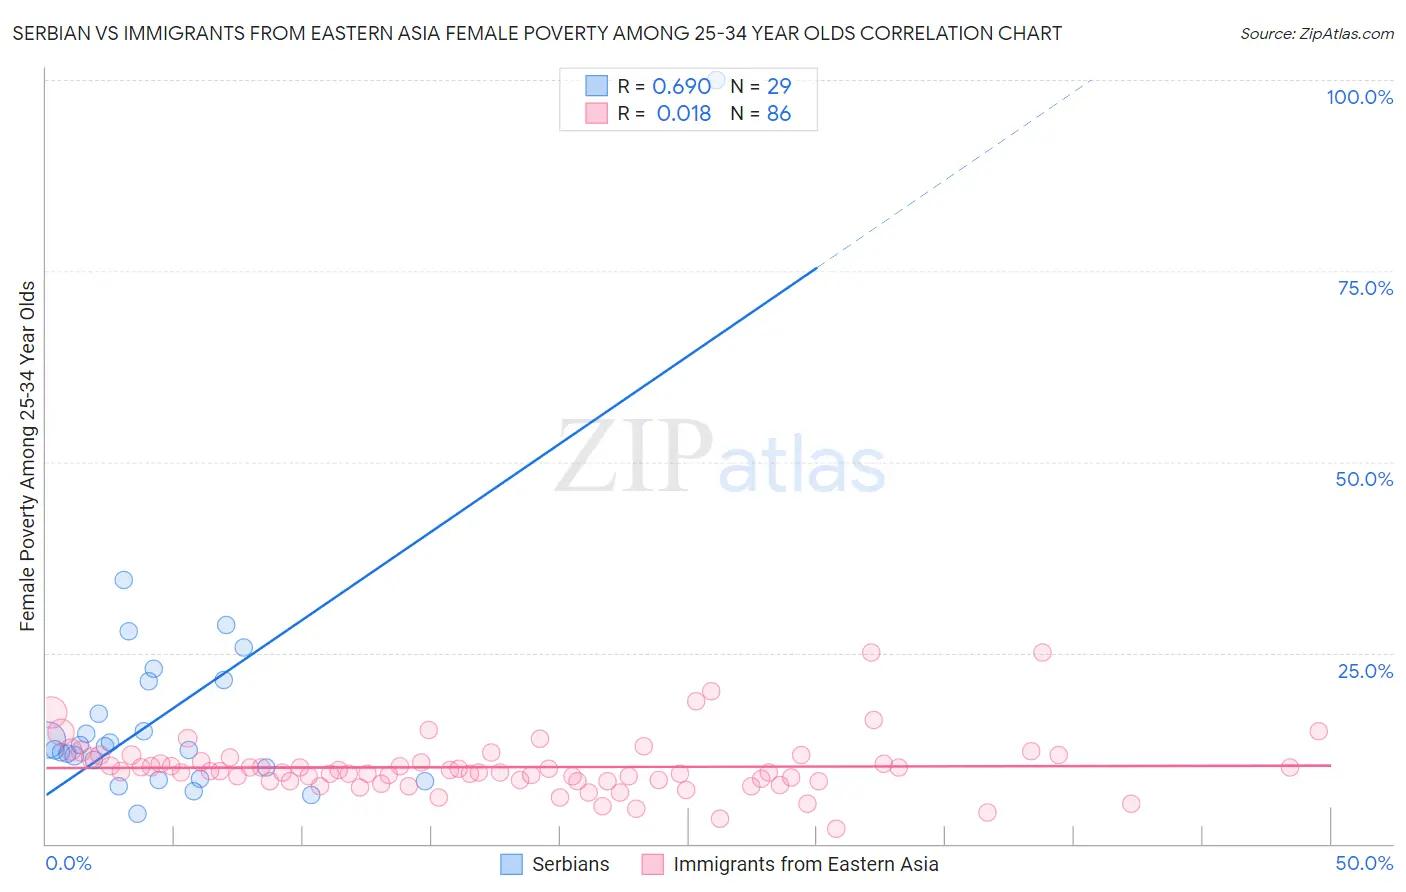 Serbian vs Immigrants from Eastern Asia Female Poverty Among 25-34 Year Olds